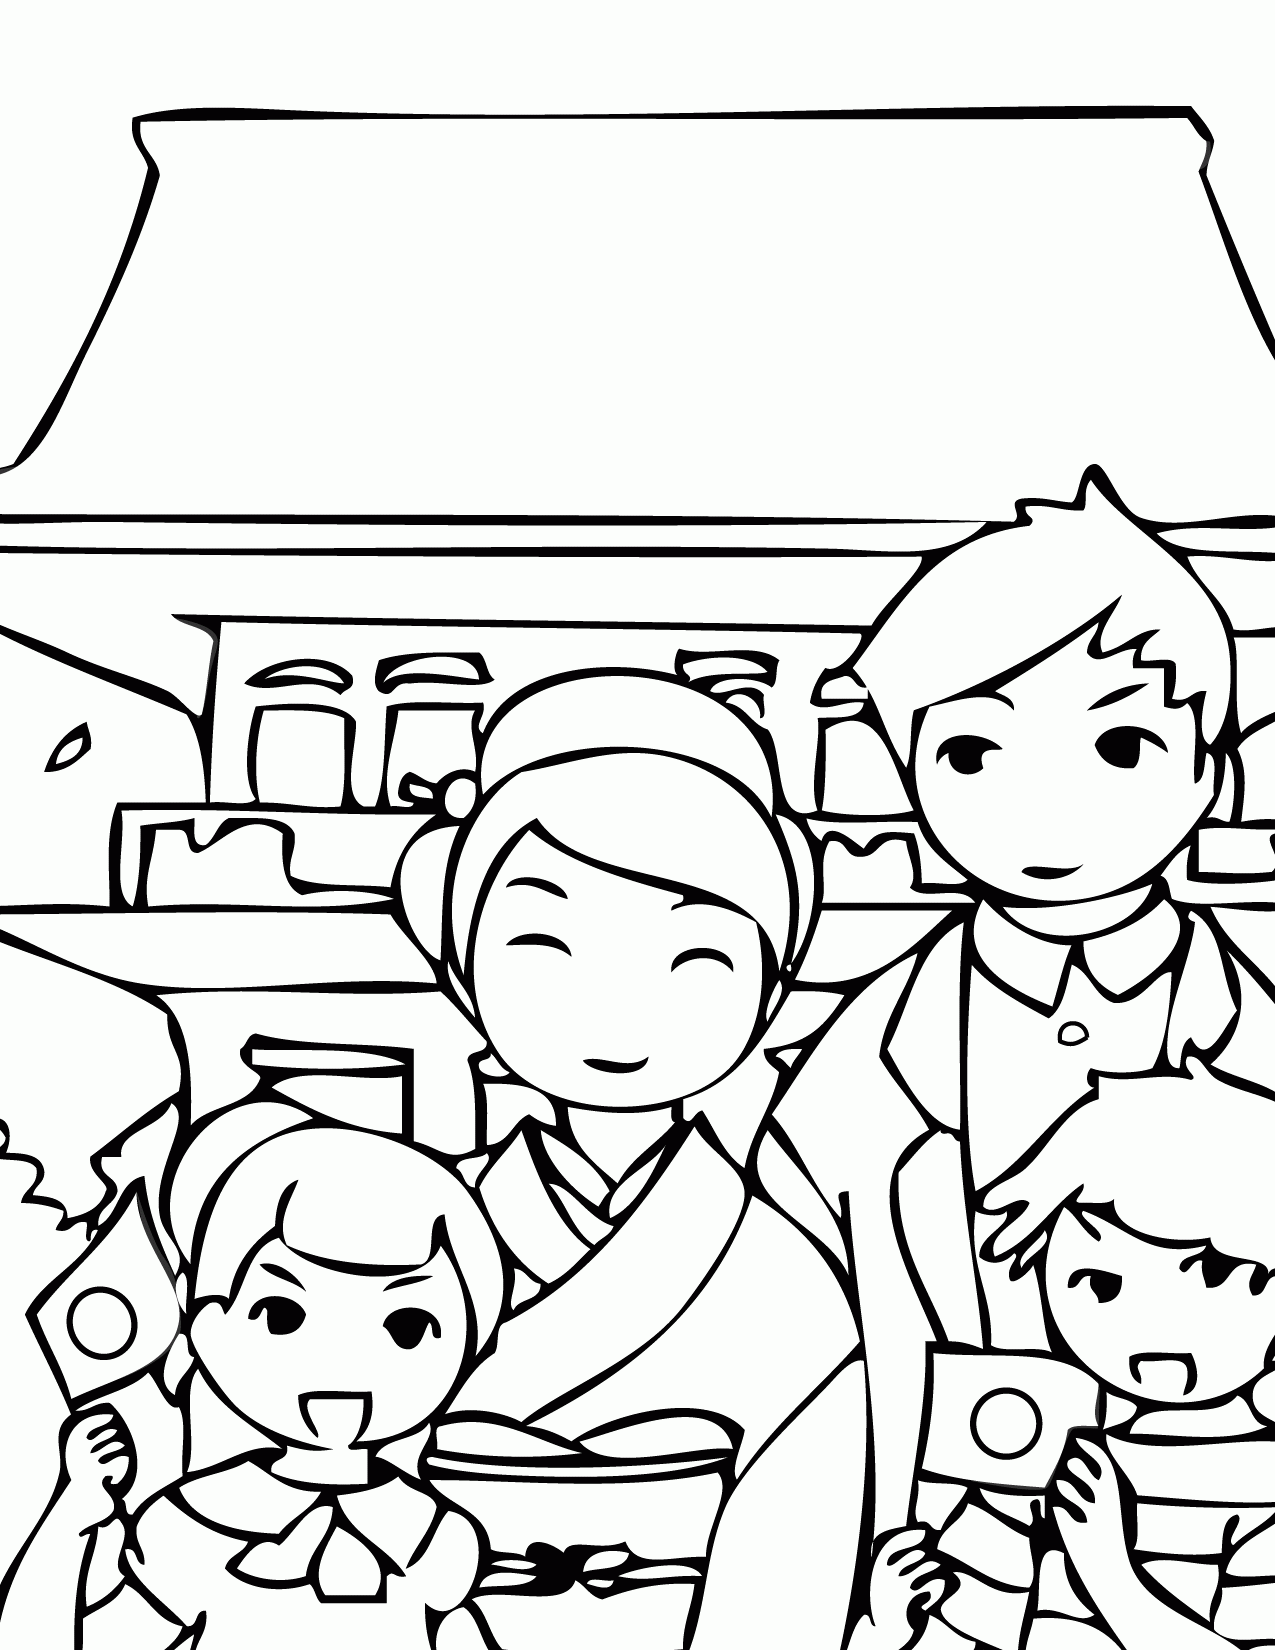 Japan Coloring Page - Coloring Home